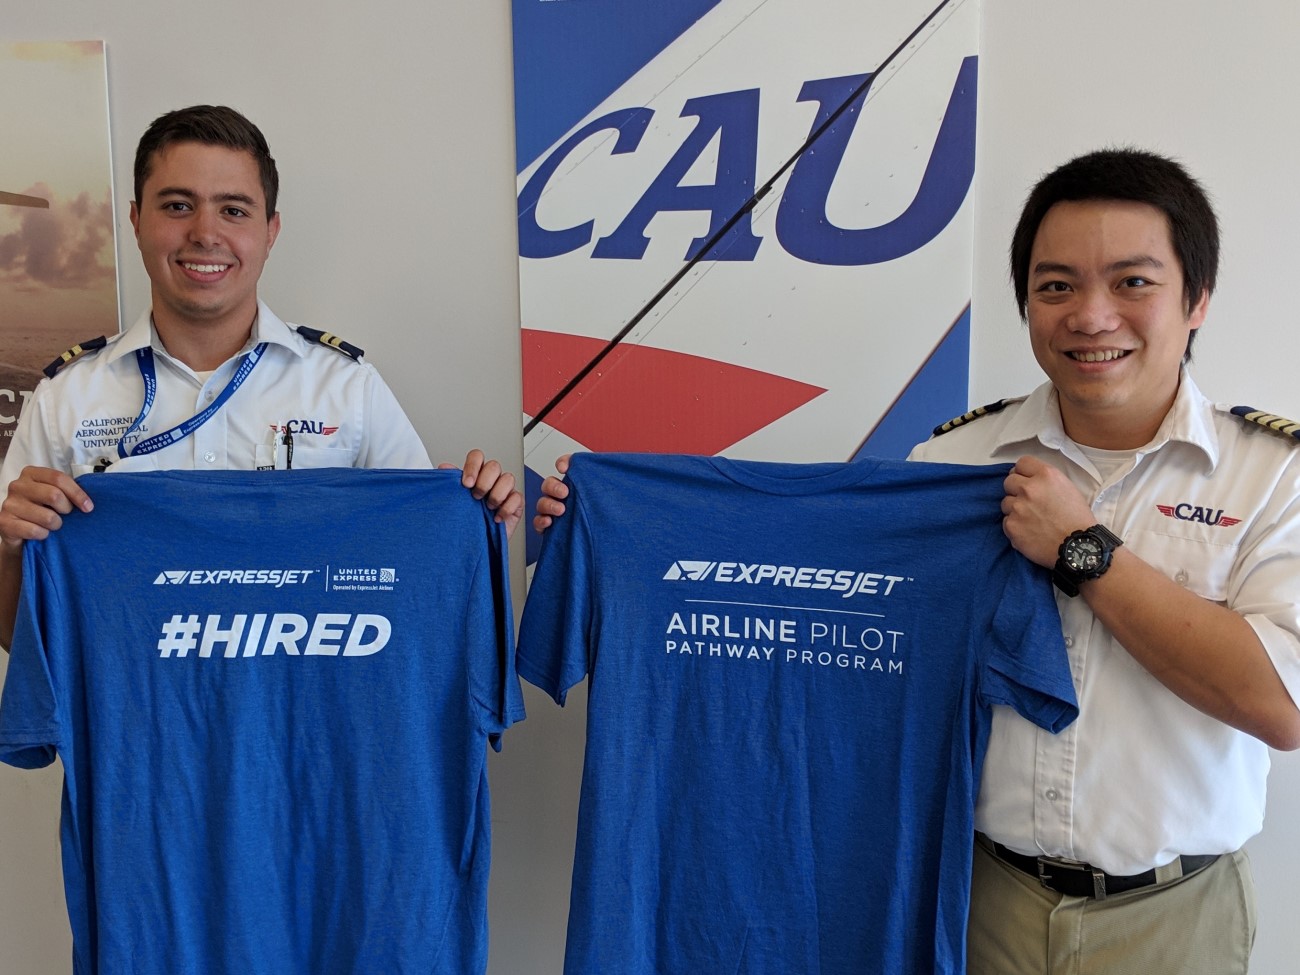 Miguel and Pat_ExpressJet Career Assistance - CAU